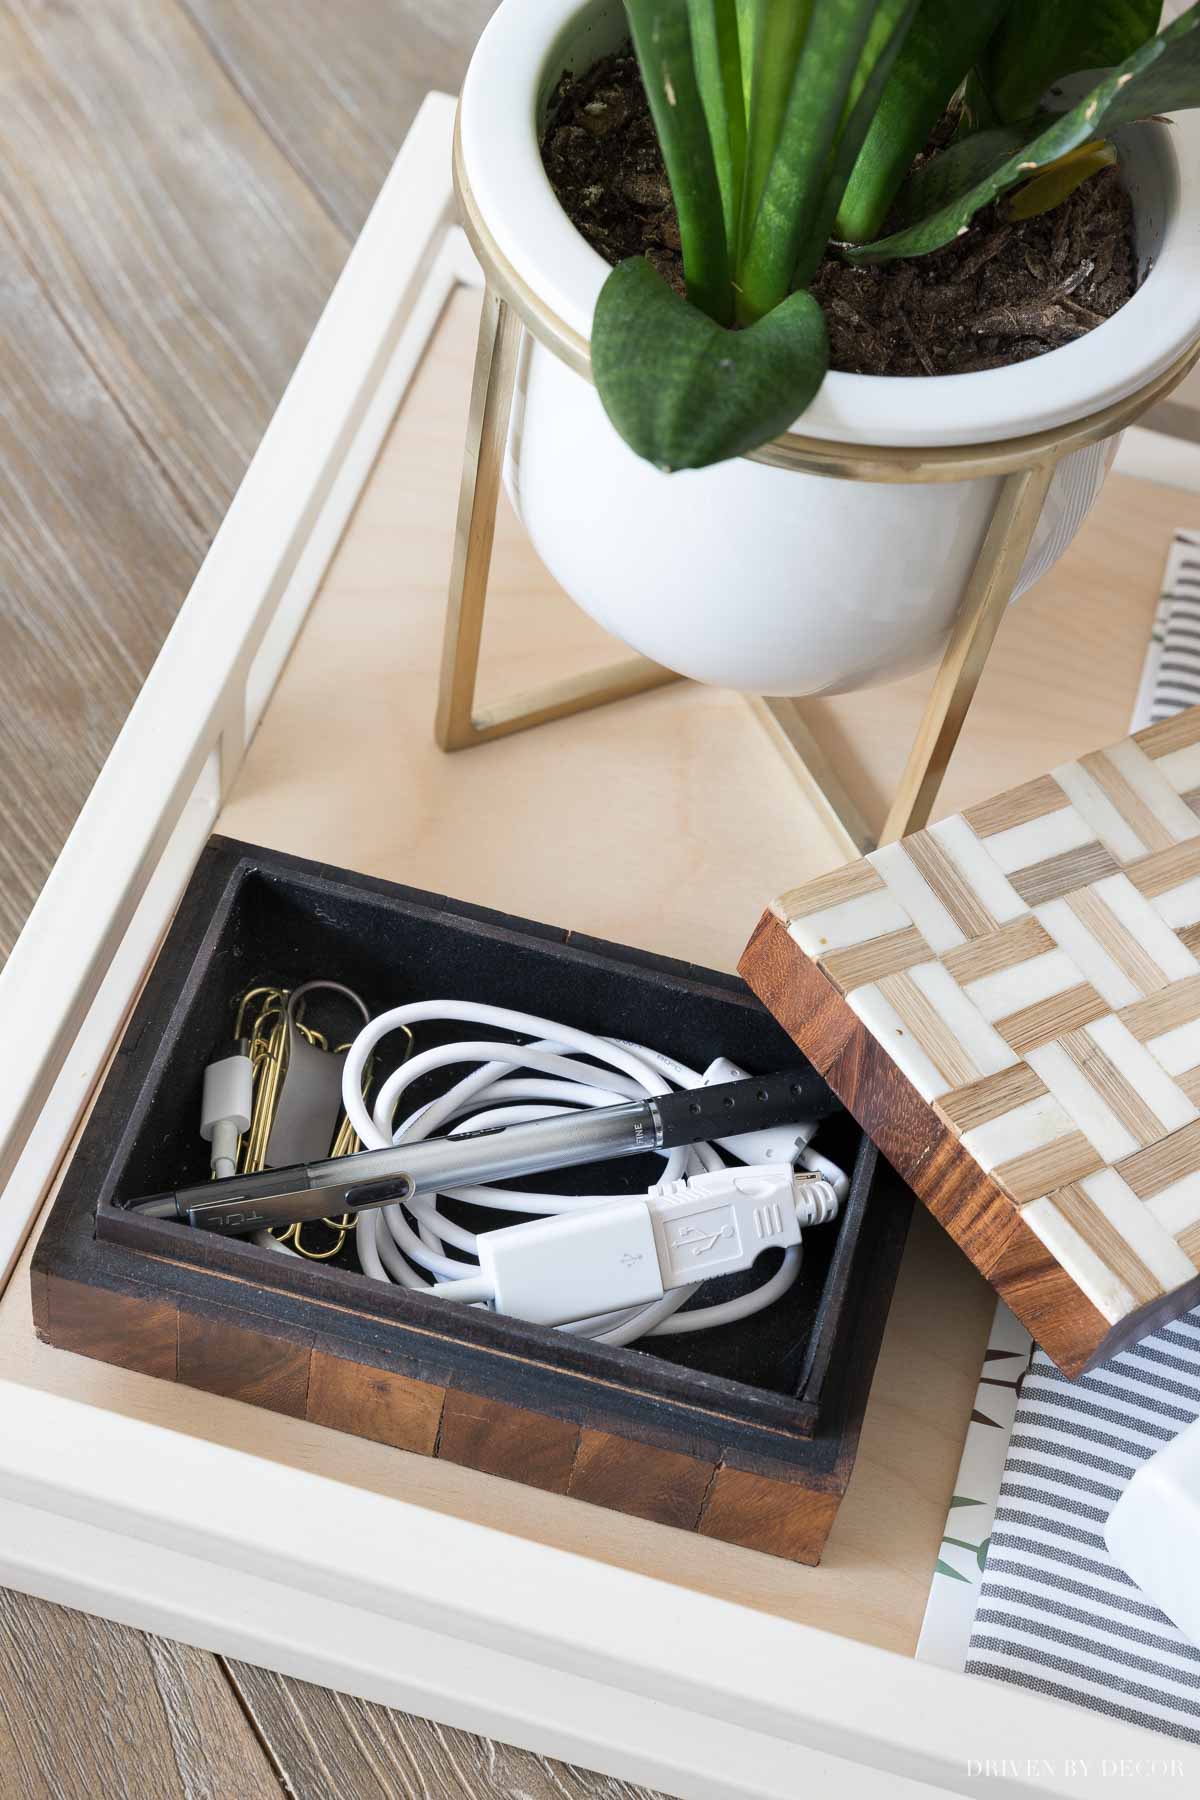 An idea for keeping your desk organized and neat - have a small decorative box for your computer cords, pen, paperclips, and other most-used office supplies